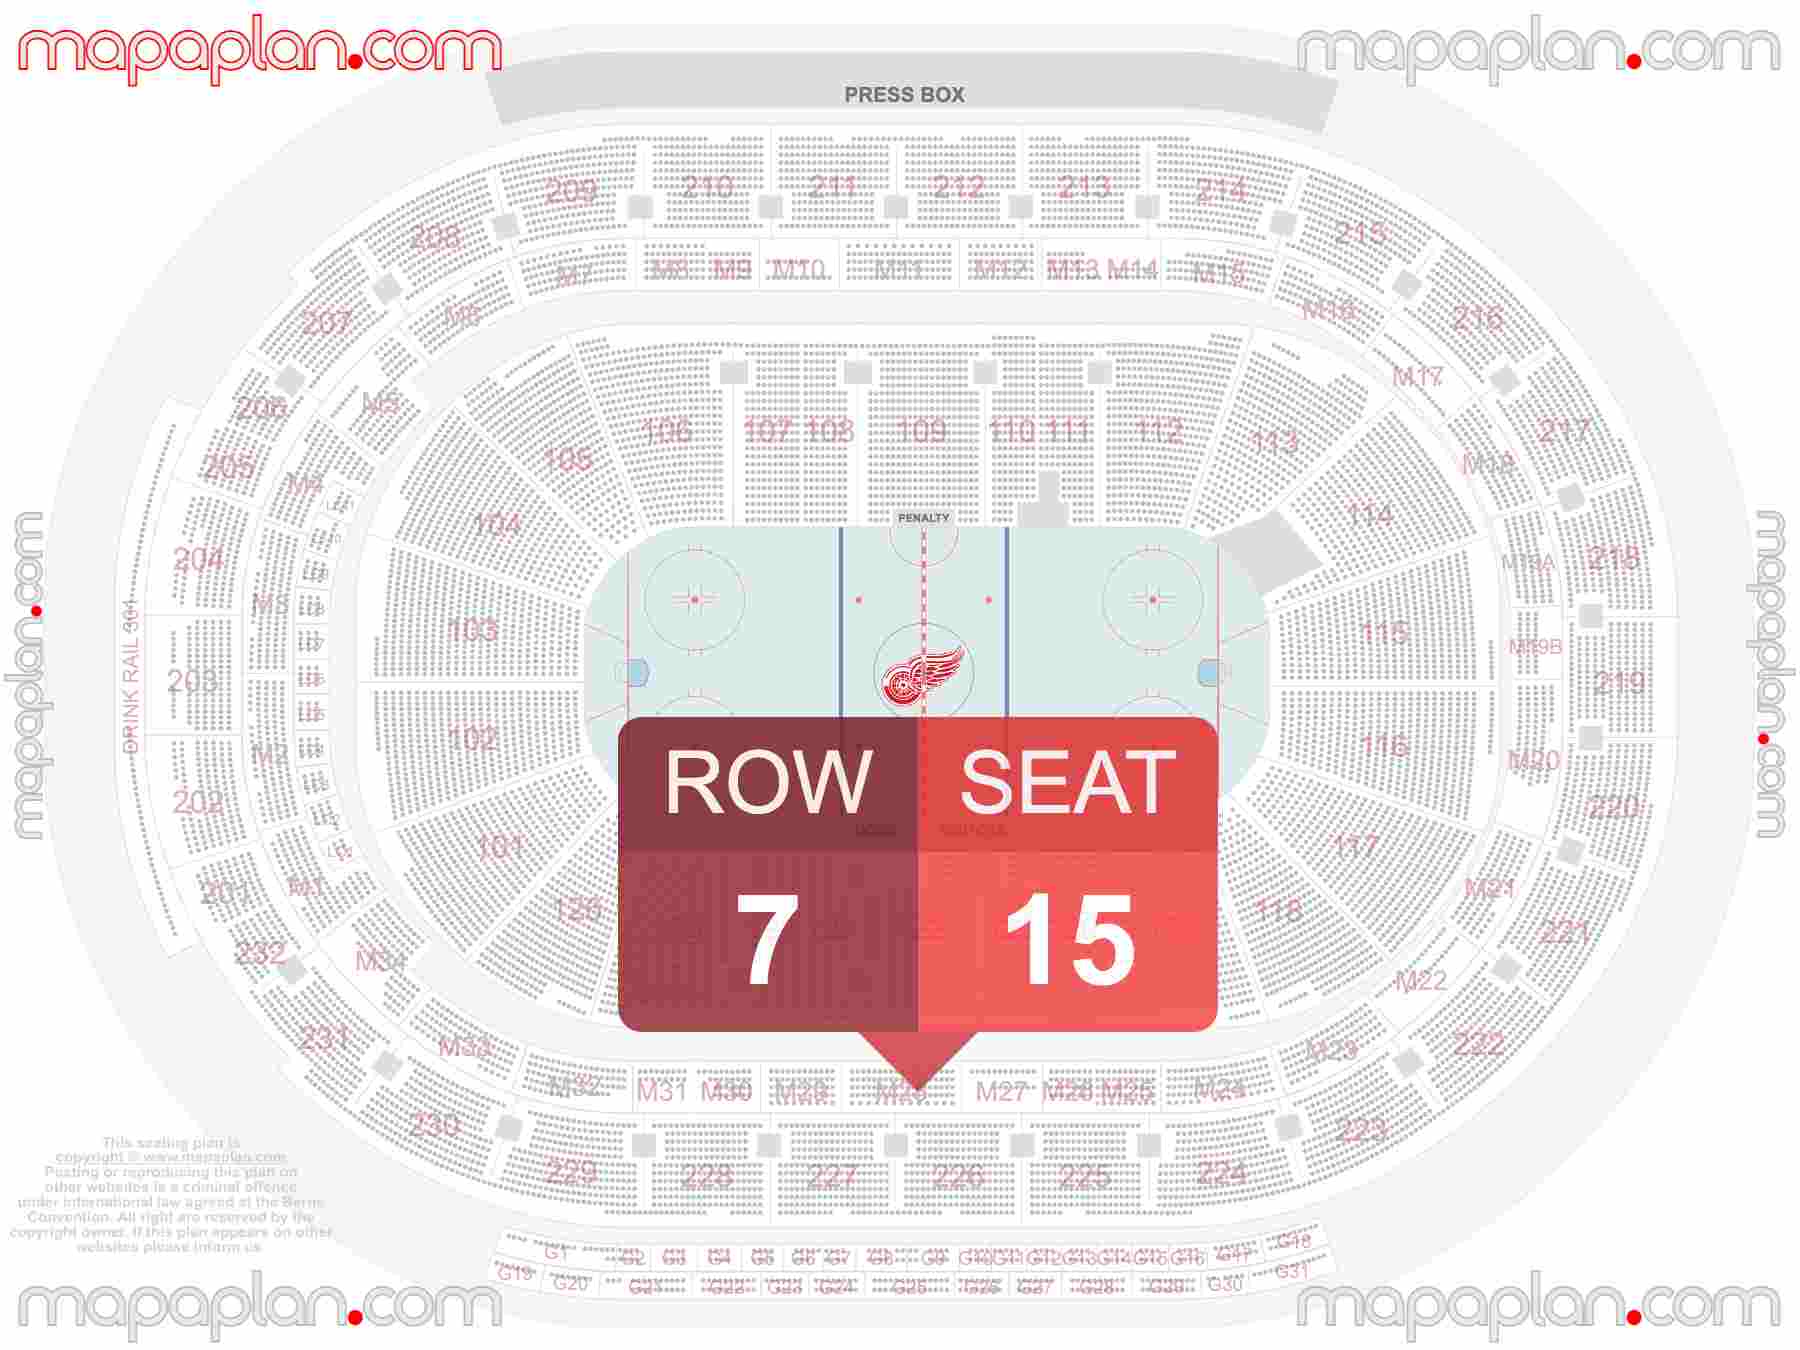 Detroit Little Caesars Arena seating chart Detroit Red Wings NHL hockey find best seats row numbering system plan showing how many seats per row - Individual 'find my seat' virtual locator